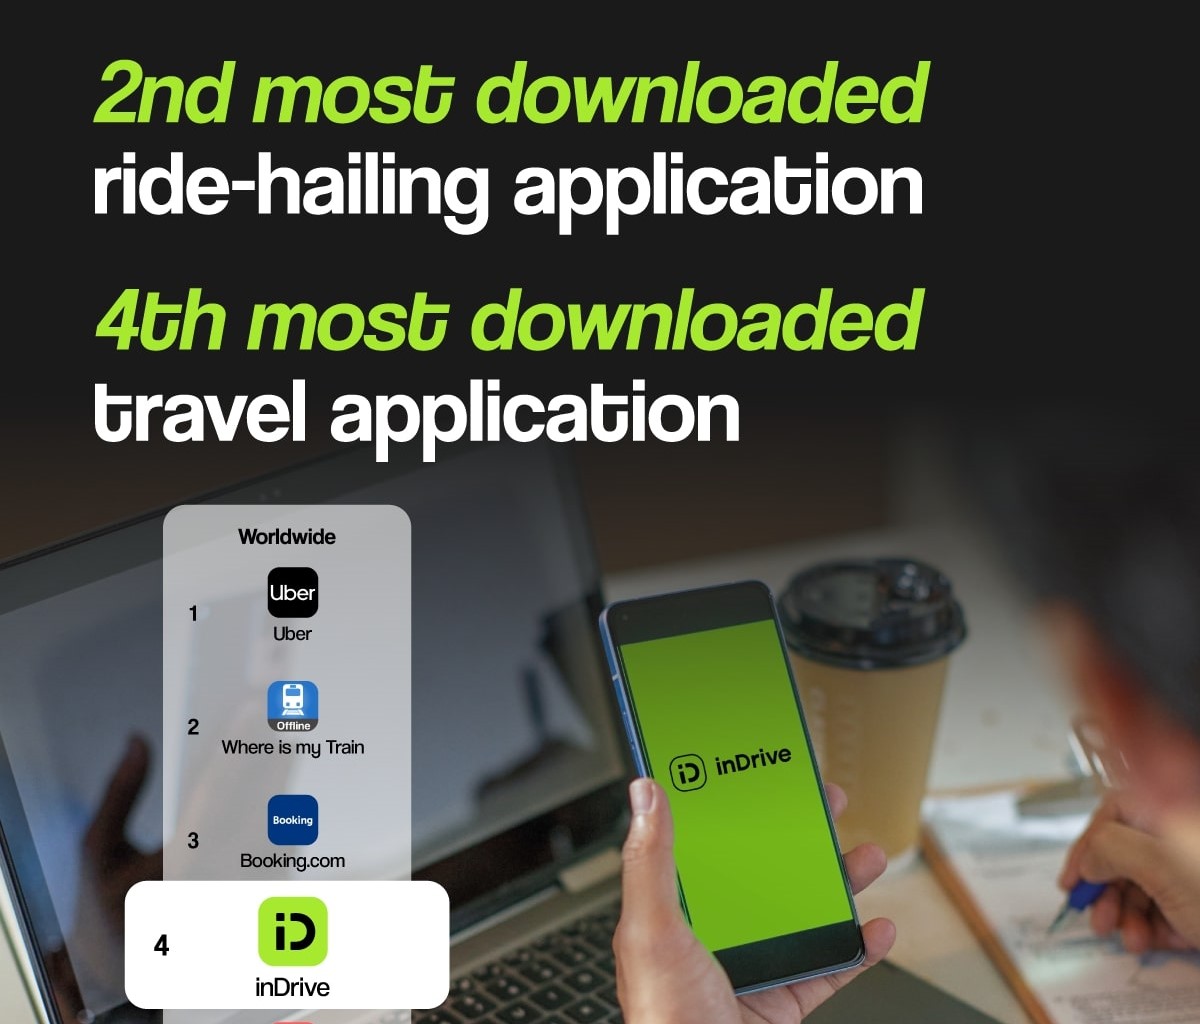 inDrive remains the world’s second most downloaded ride-hailing app